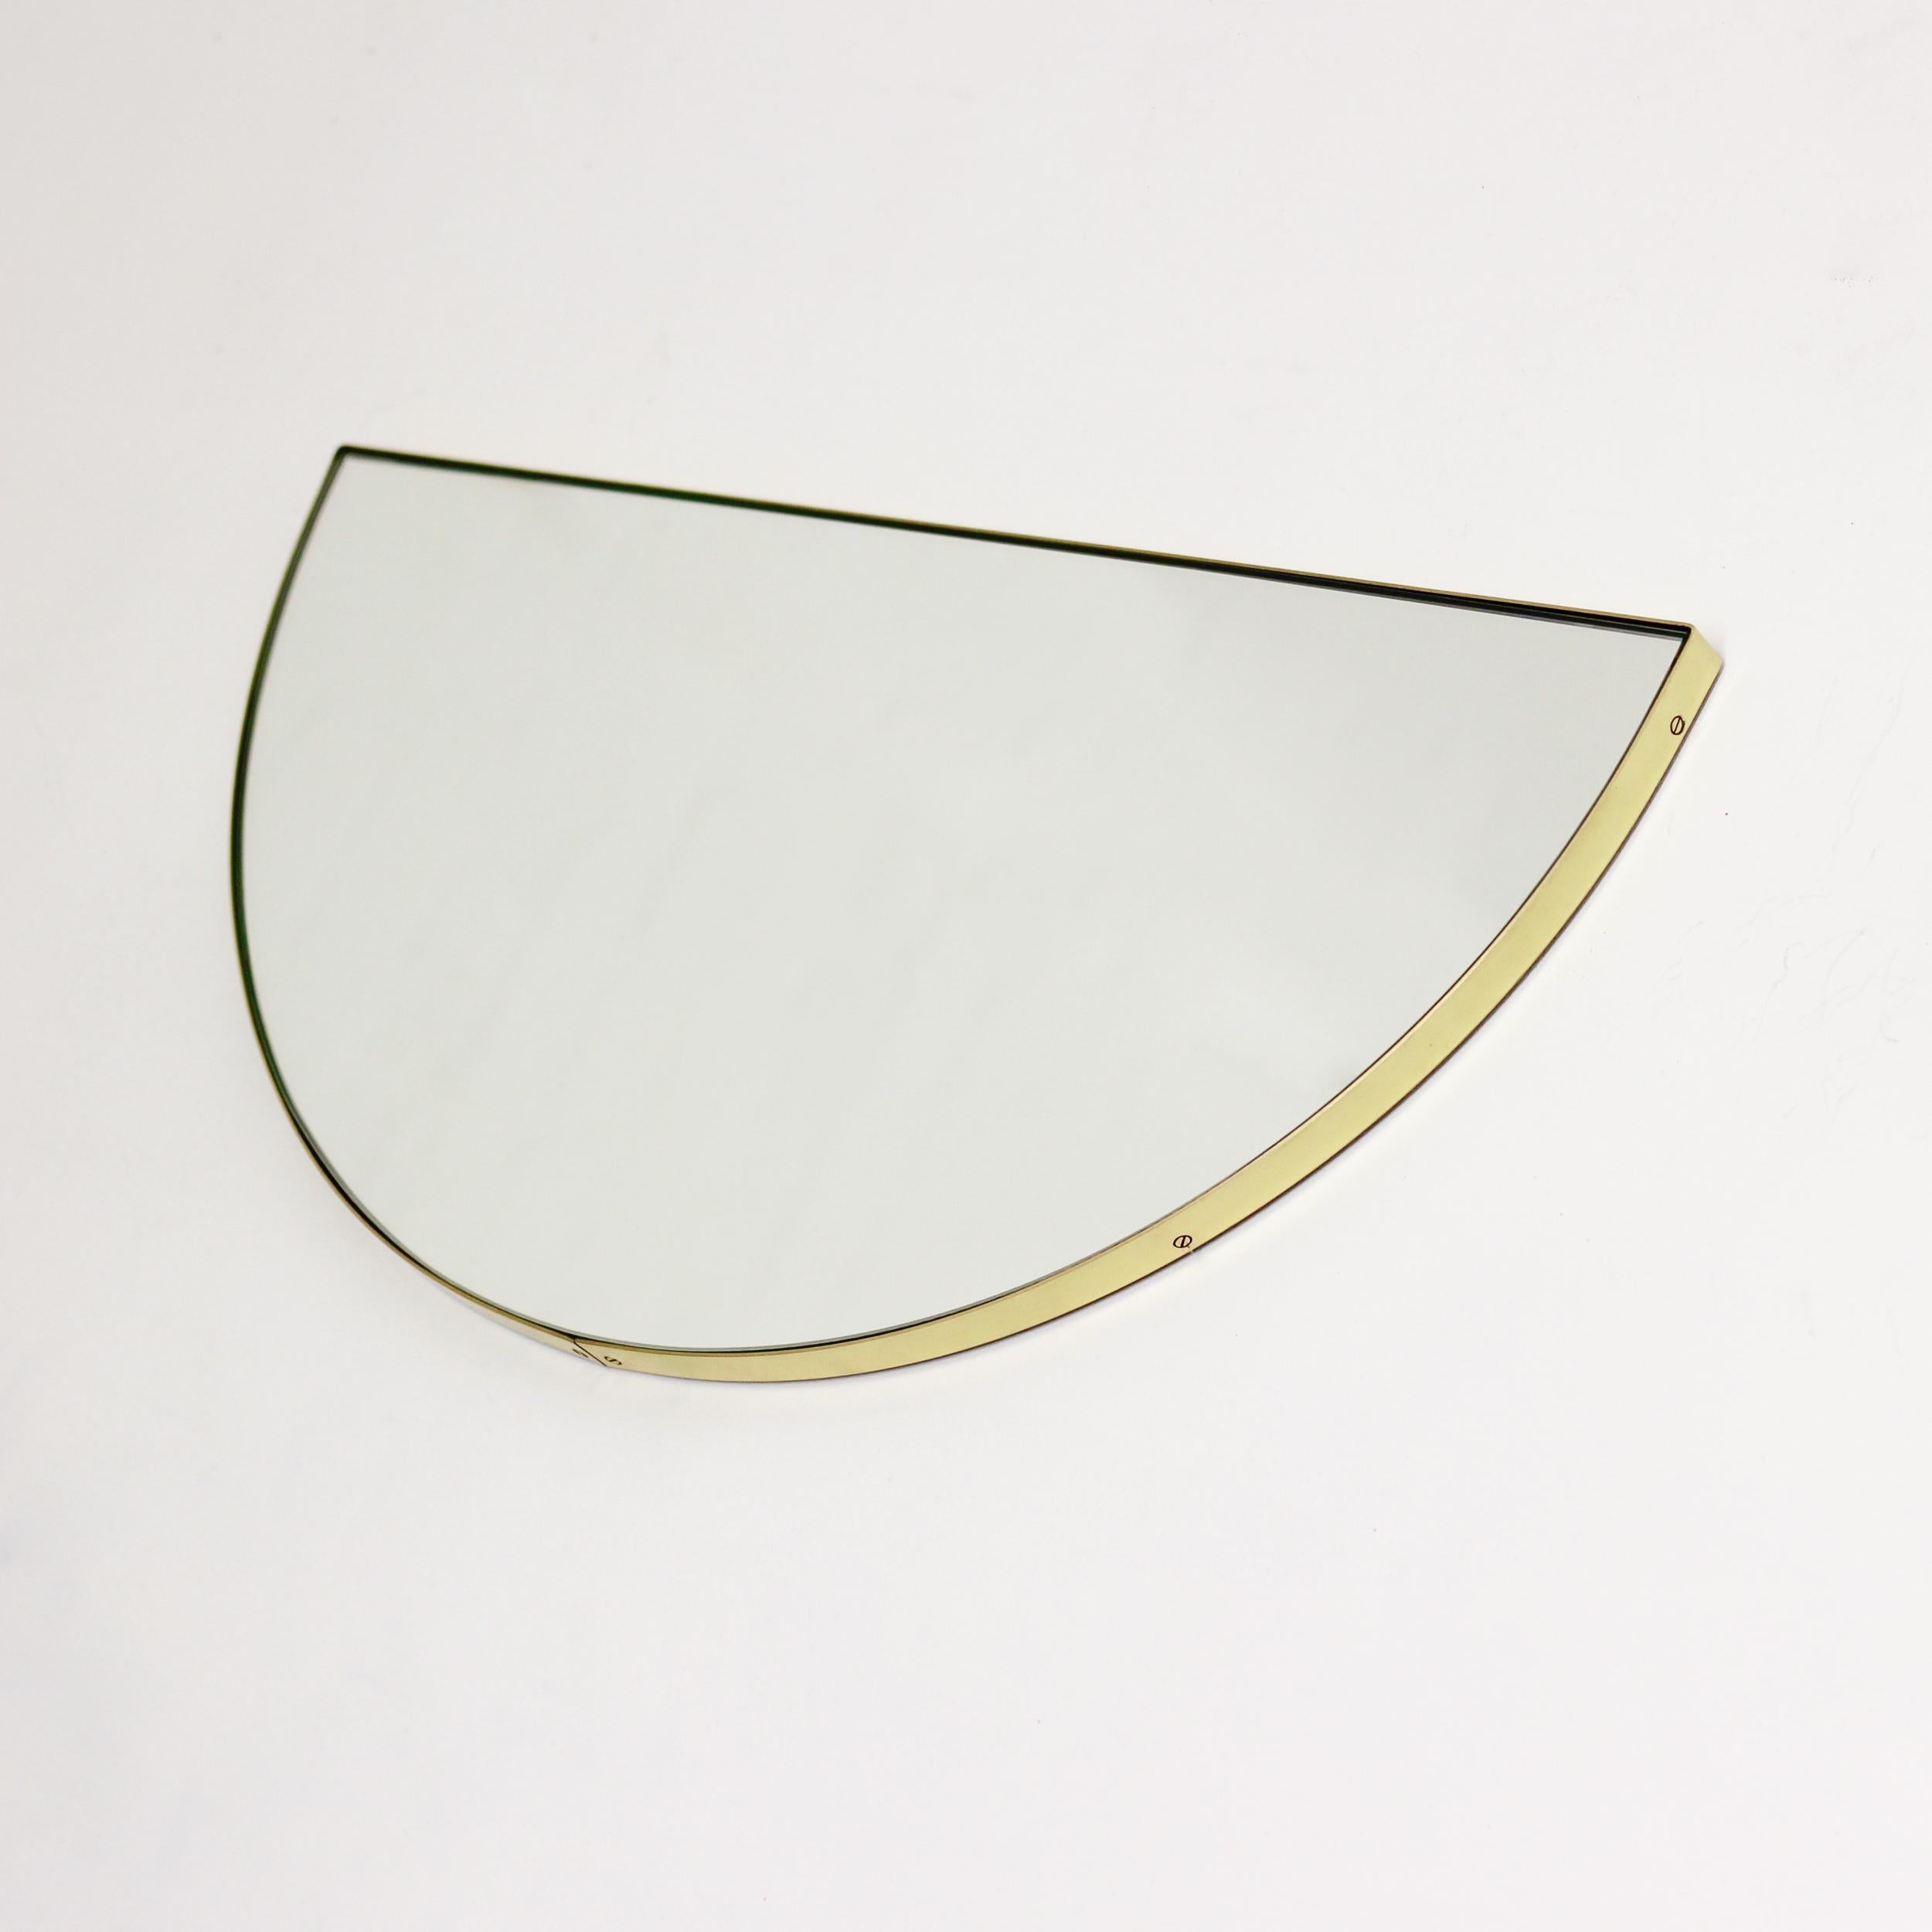 Original and minimalist half-moon mirror with an elegant brushed brass frame. Quality design that ensures the mirror sits perfectly parallel to the wall. Designed and made in London, UK.
 
Fitted with an ingenious French cleat (split batten) system